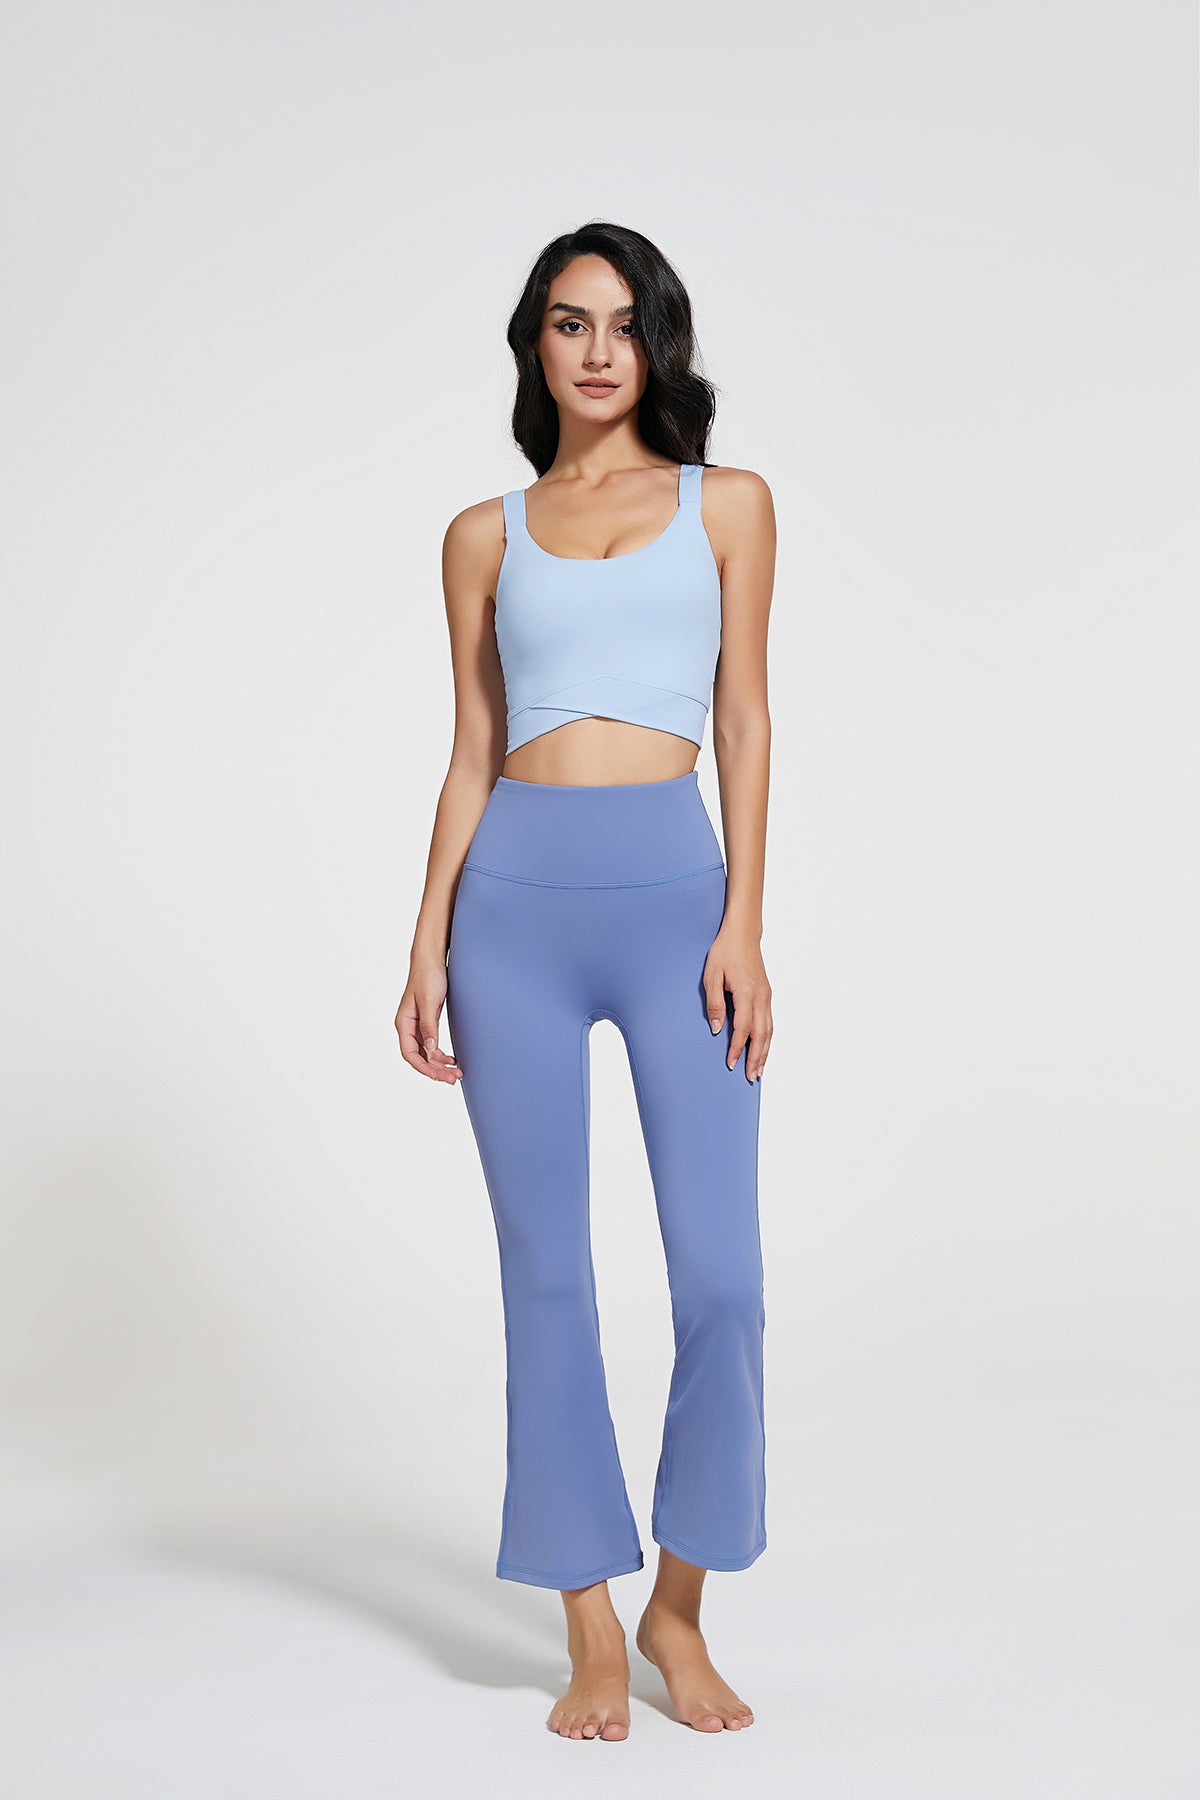 High-Rise 7/8 Solid Wild Side Flare Leggings  Flare leggings, Flares, Free  people activewear